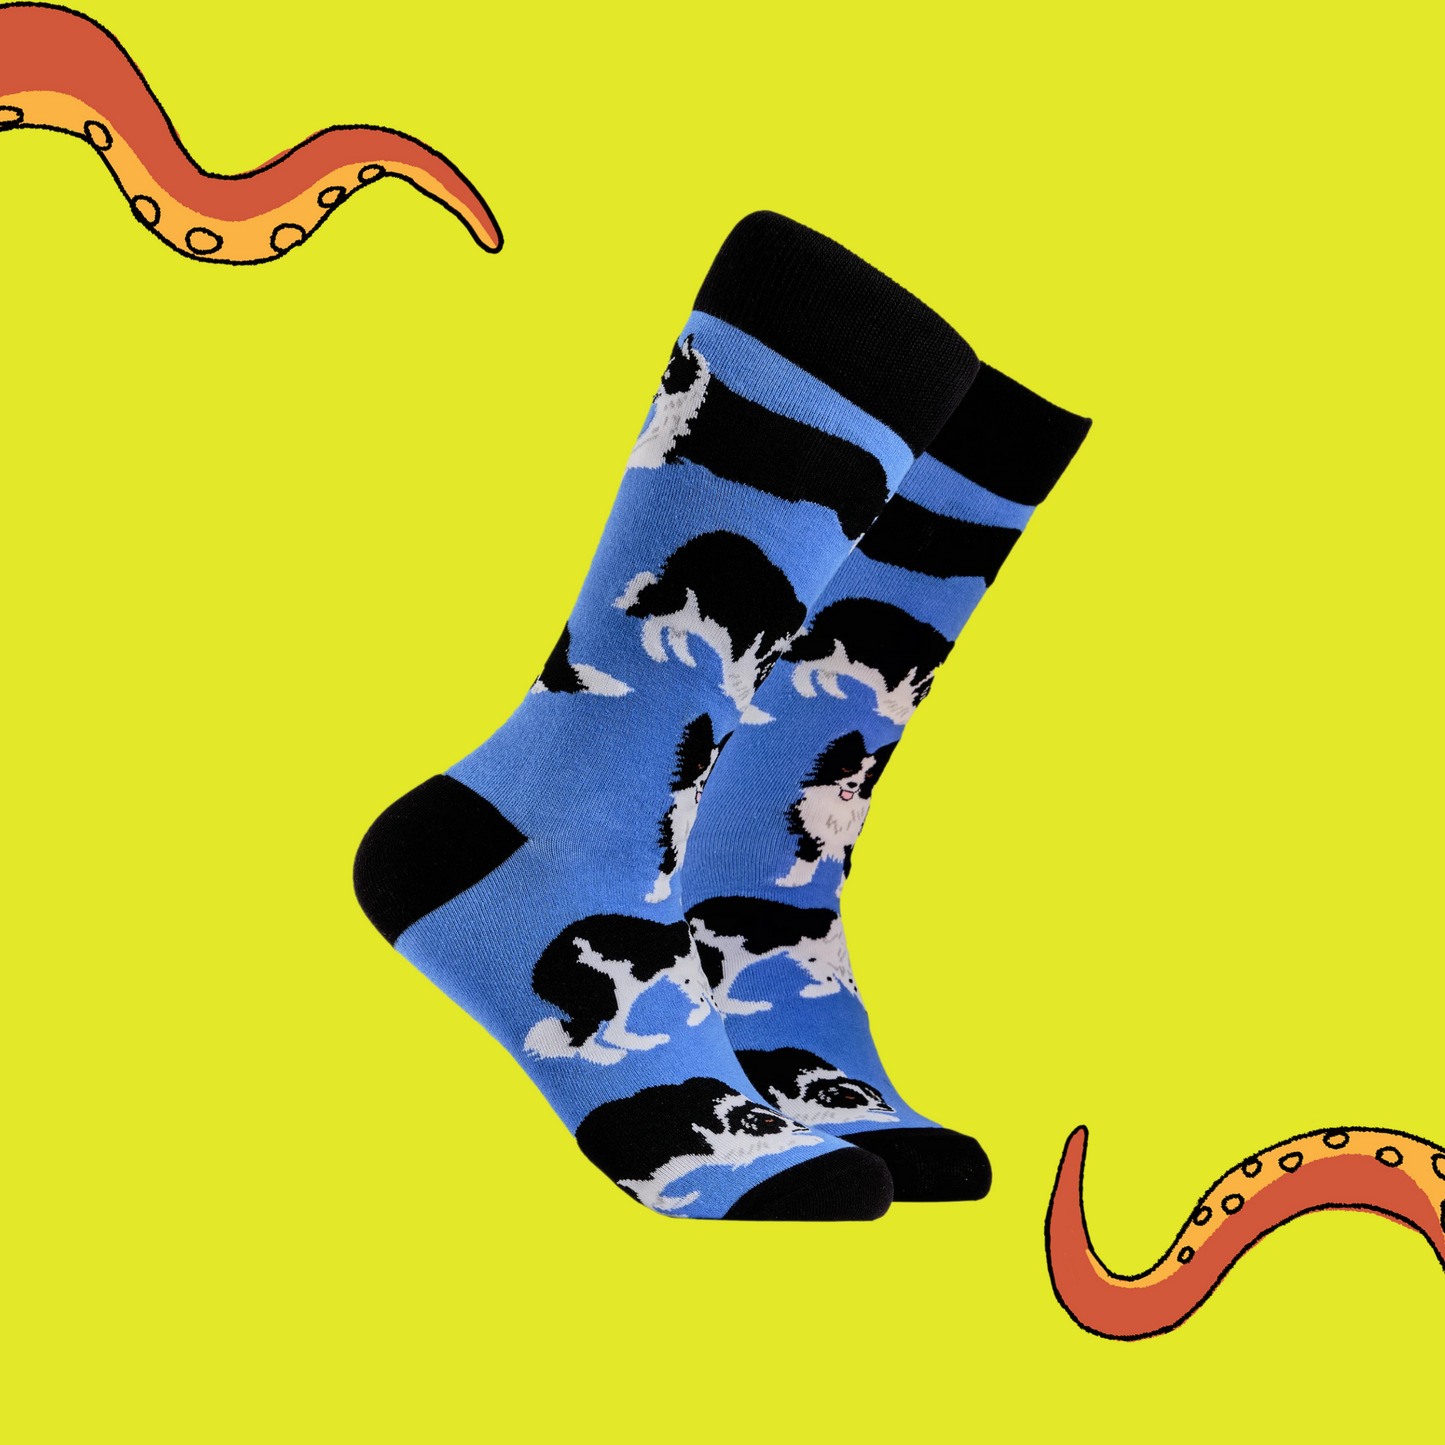 Border Collie Dog Socks - Collies. A pair of socks depicting Border collie dogs. Deep Blue legs, black cuff, heel and toe.